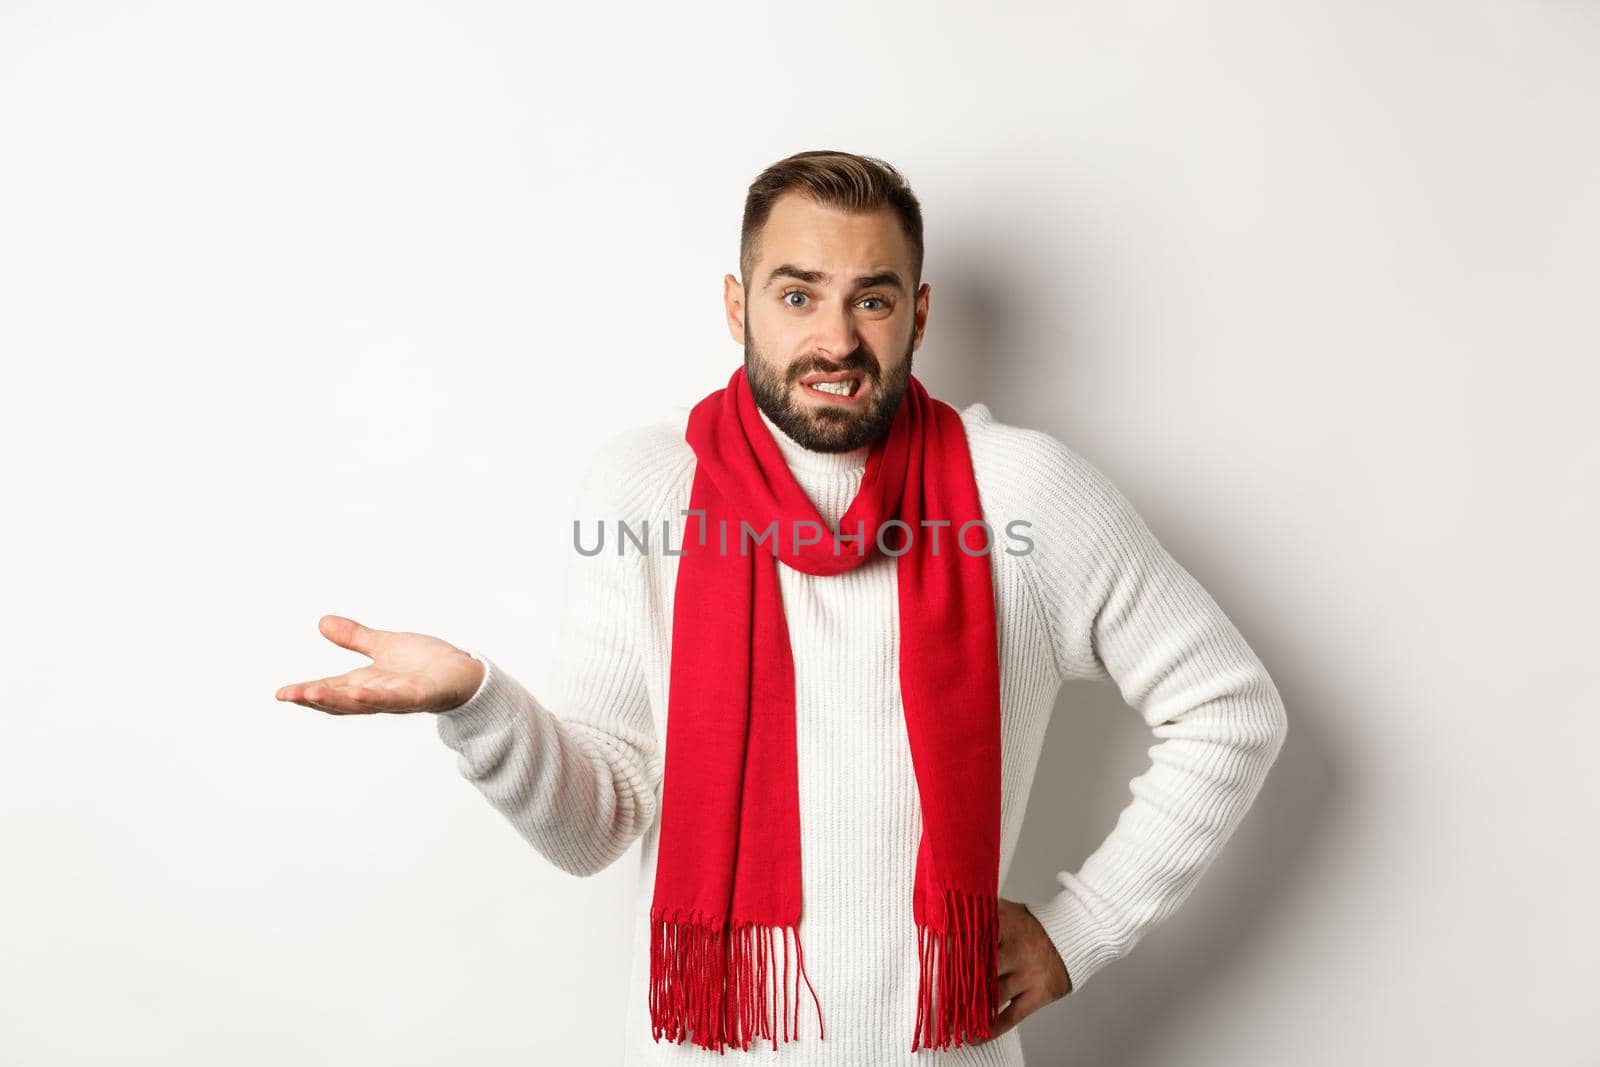 Clueless bearded man dont know, shrugging and saying sorry, standing puzzled against white background.